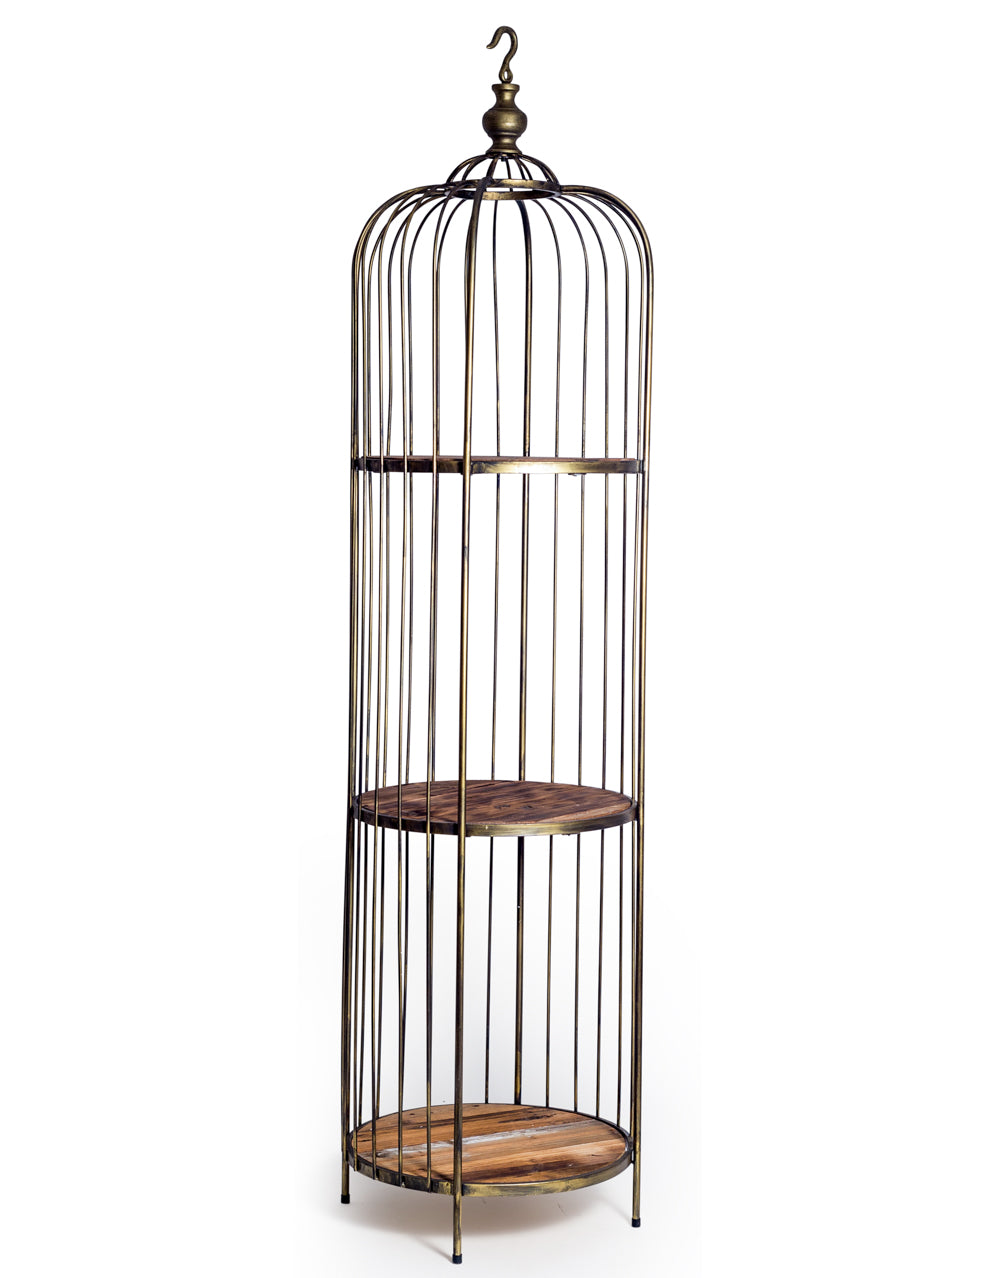 Antique Gold Bird Cage Style Storage Unit with Reclaimed Wood Shelves